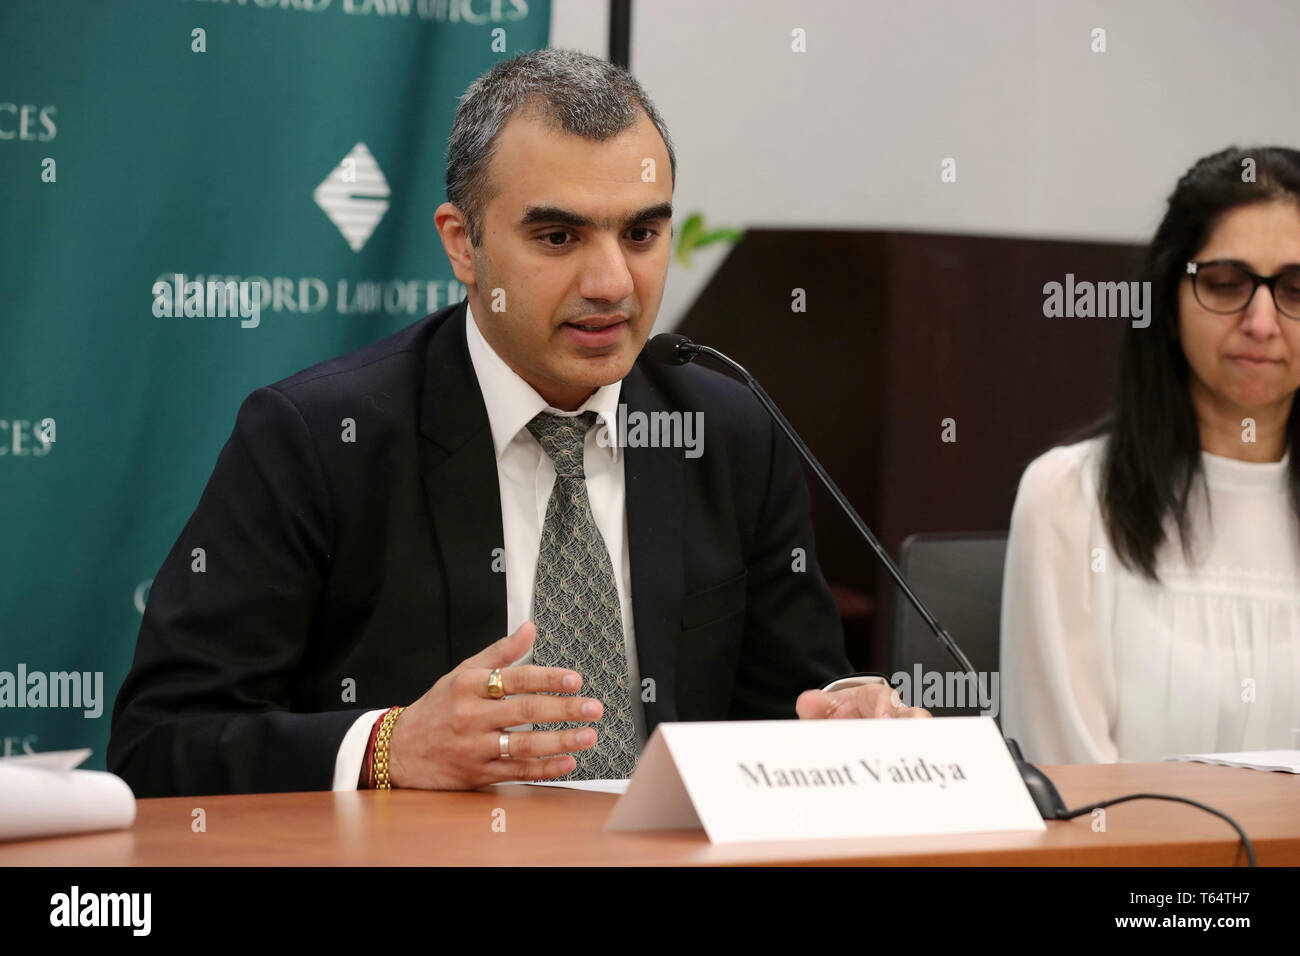 Chicago, USA. 29th Apr, 2019. Plaintiff Manant Vaidya (L), who lost three generations of family members in the crash of the Ethiopian Airlines Flight 302, speaks during a news conference in downtown Chicago, the United States, on April 29, 2019. Two families filed lawsuits against Boeing in Chicago on Monday over the 737 MAX crashes that killed 346 people, the same day when Boeing held its shareholders meeting at the James Simpson Theatre in the Field Museum of Natural History in downtown Chicago. Credit: Wang Ping/Xinhua/Alamy Live News Stock Photo